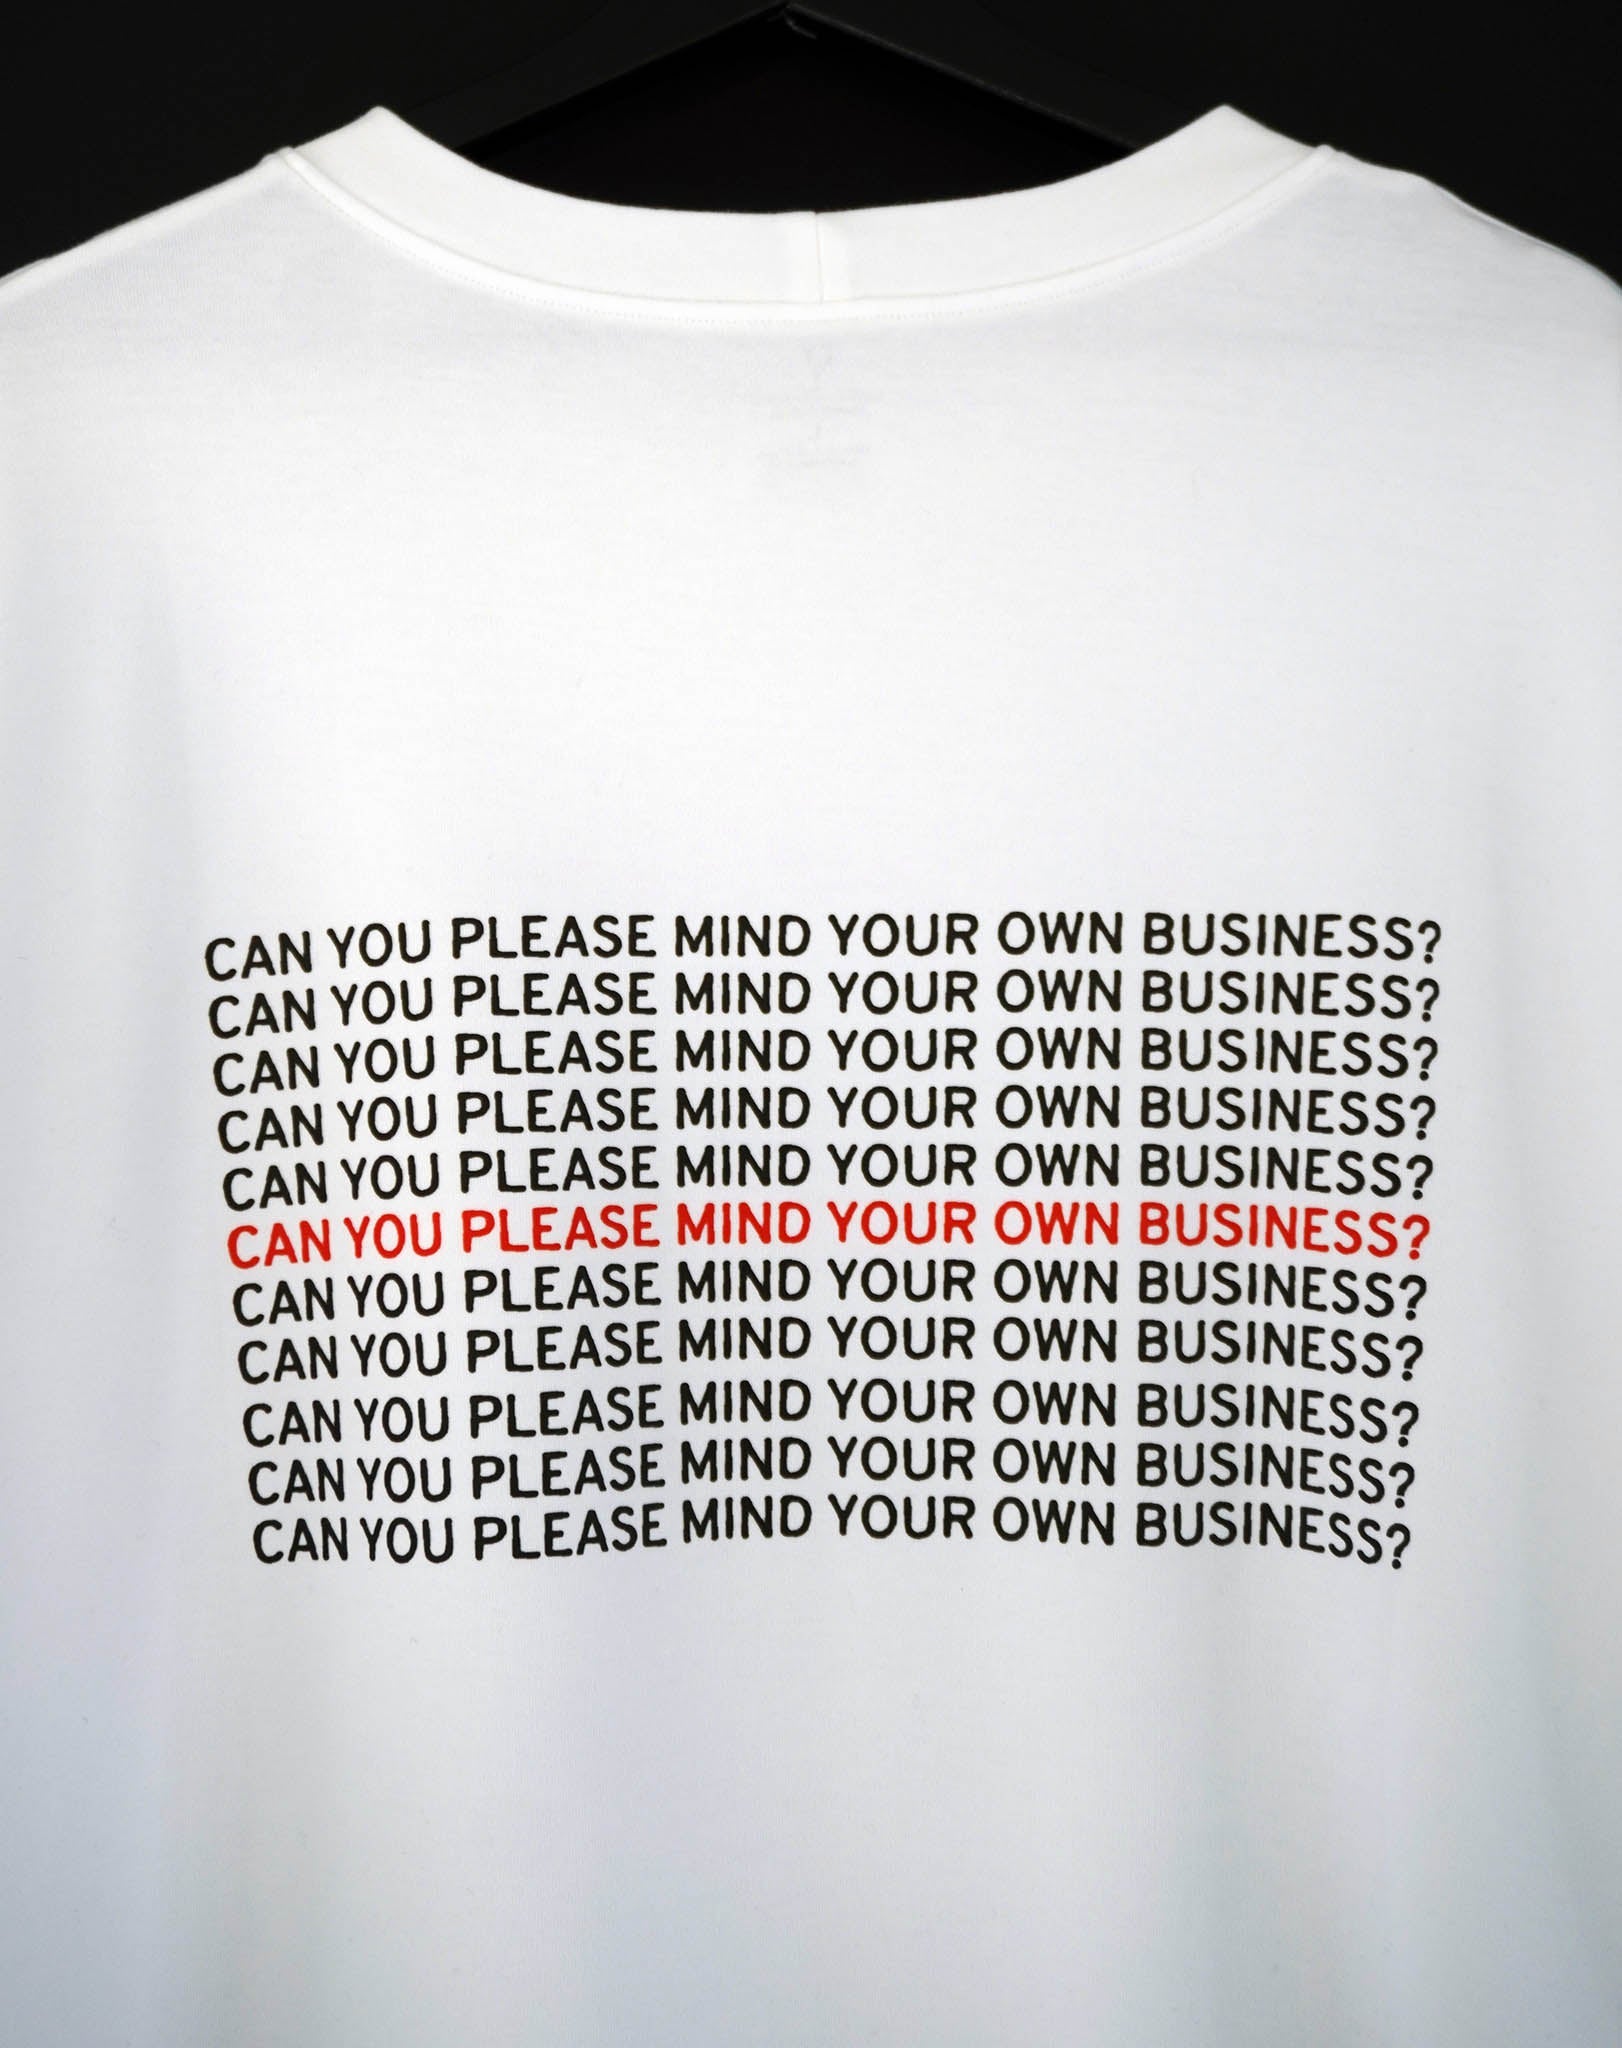 Can you please mind your own business? T-Shirt - OBLIVIOUS?